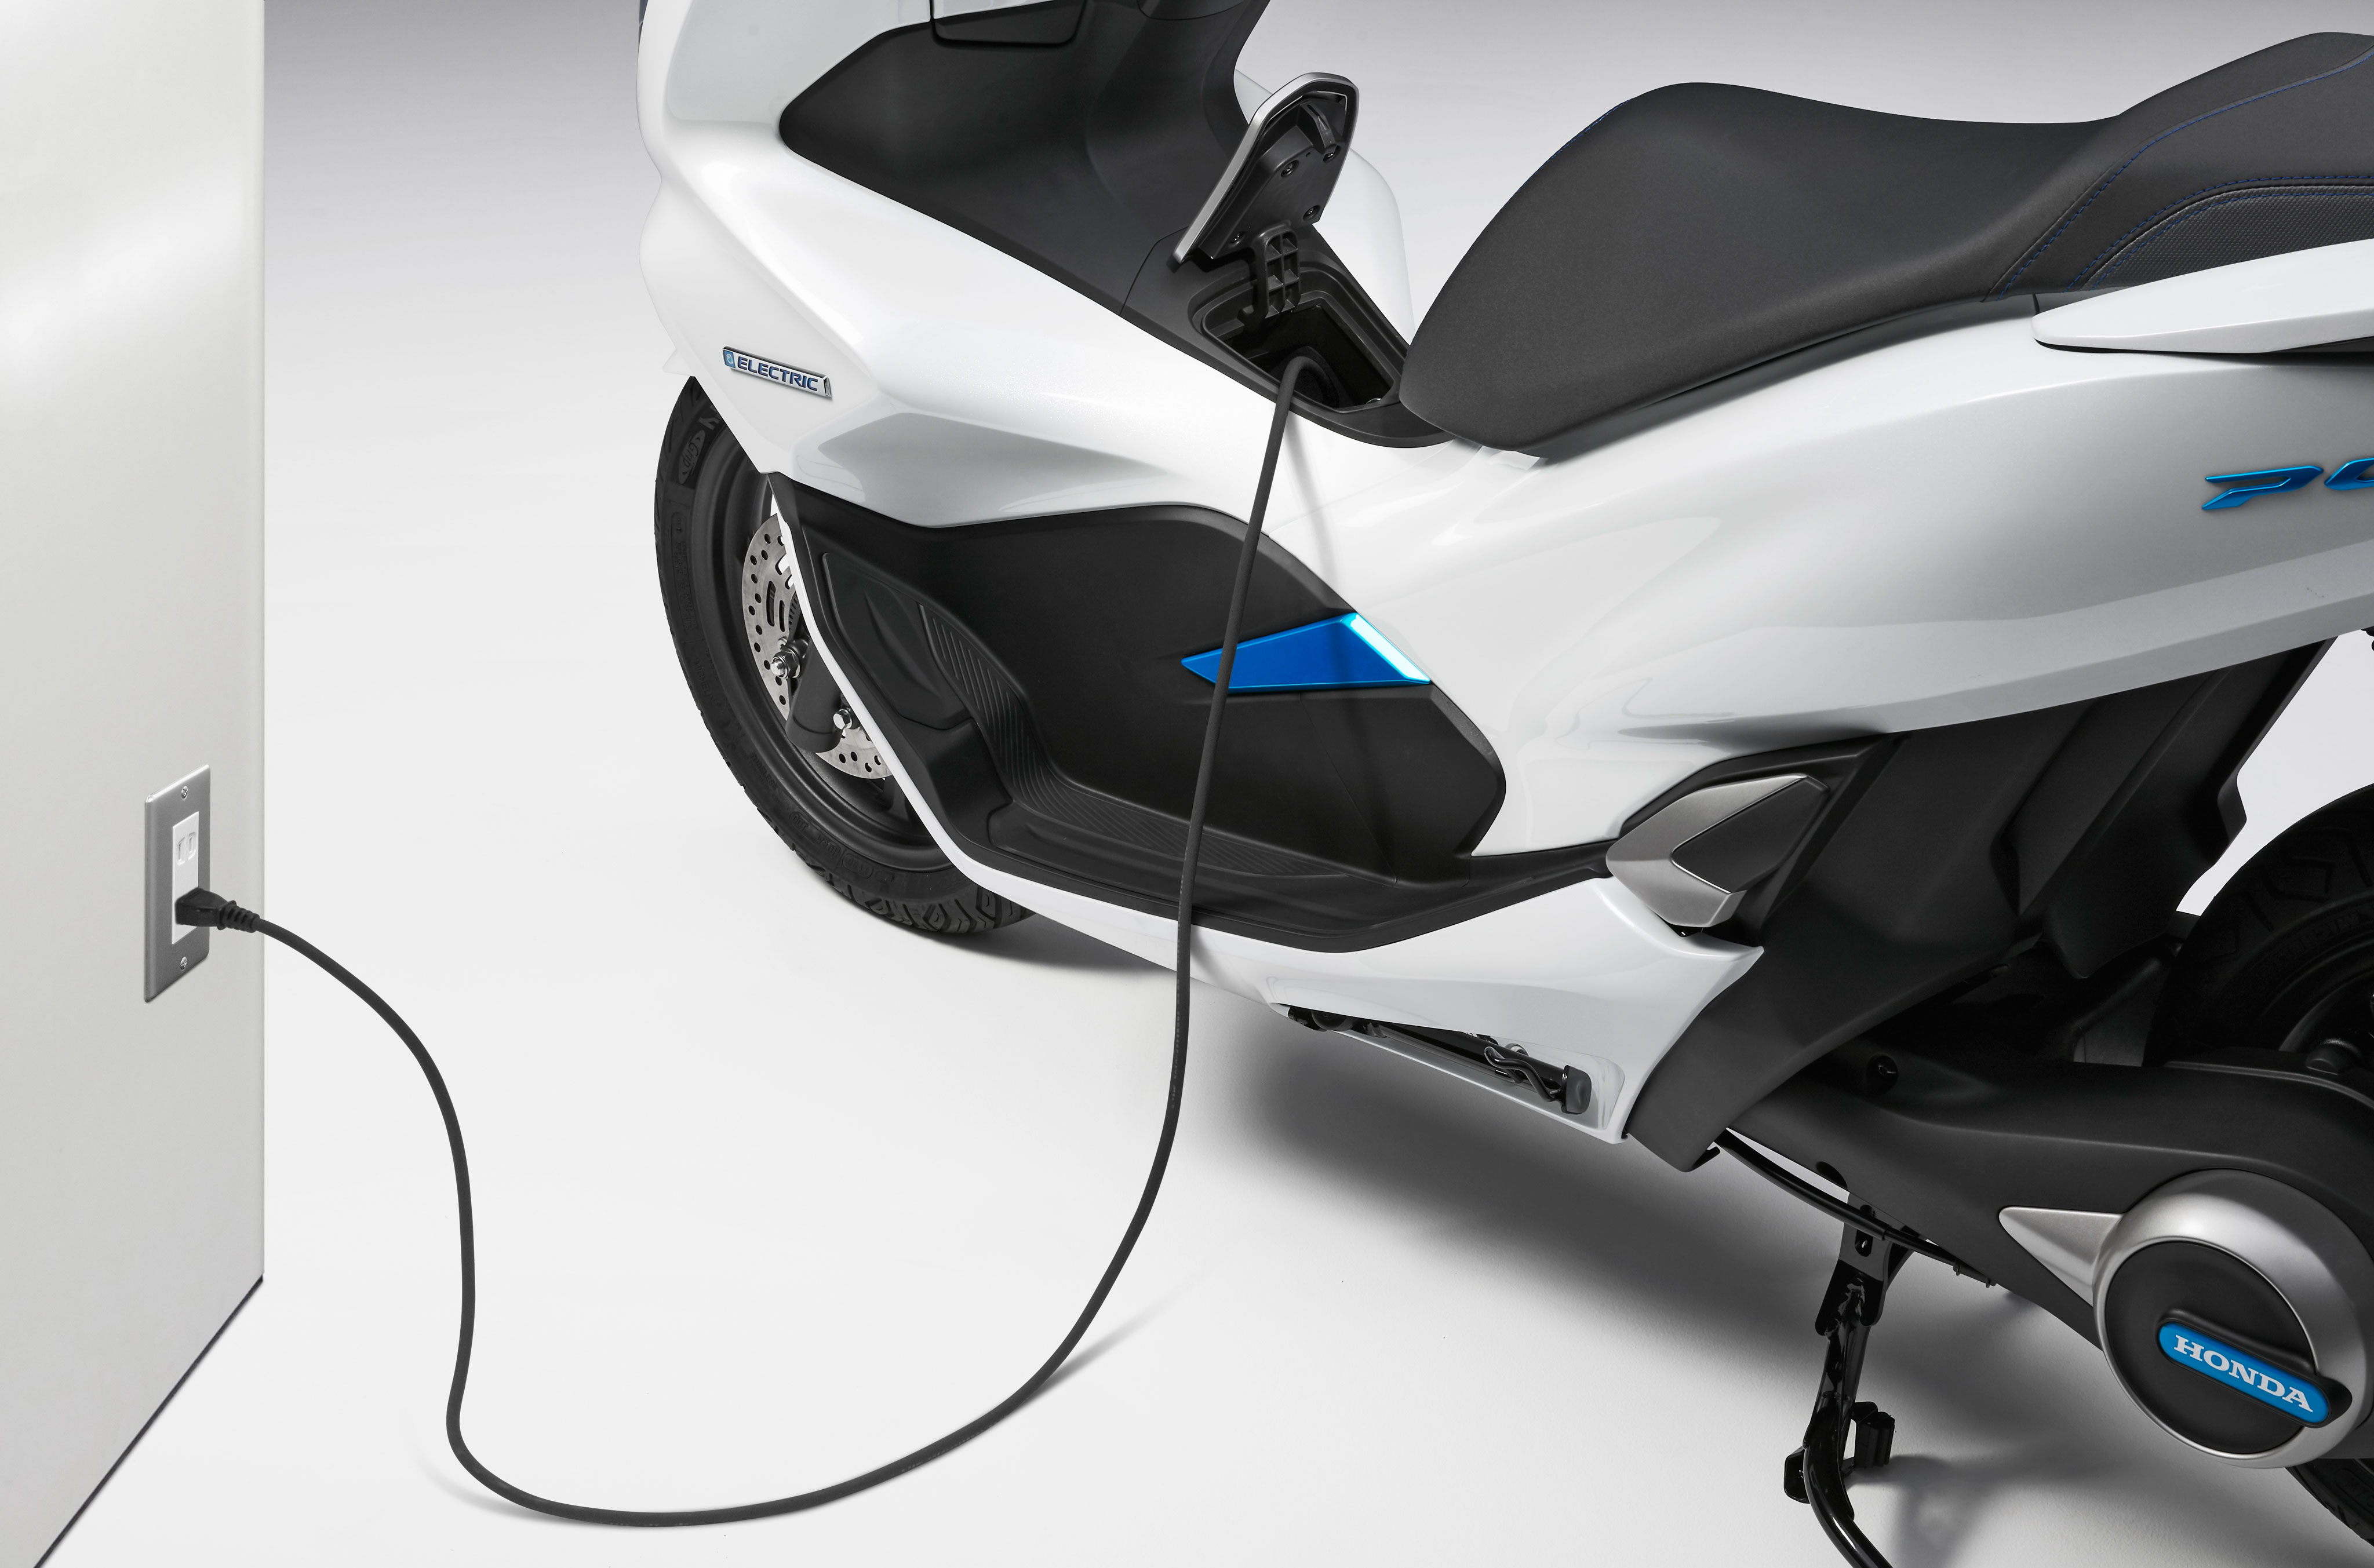 Honda PCX Electric and PCX Hybrid Unveiled - Motorcycle news ...